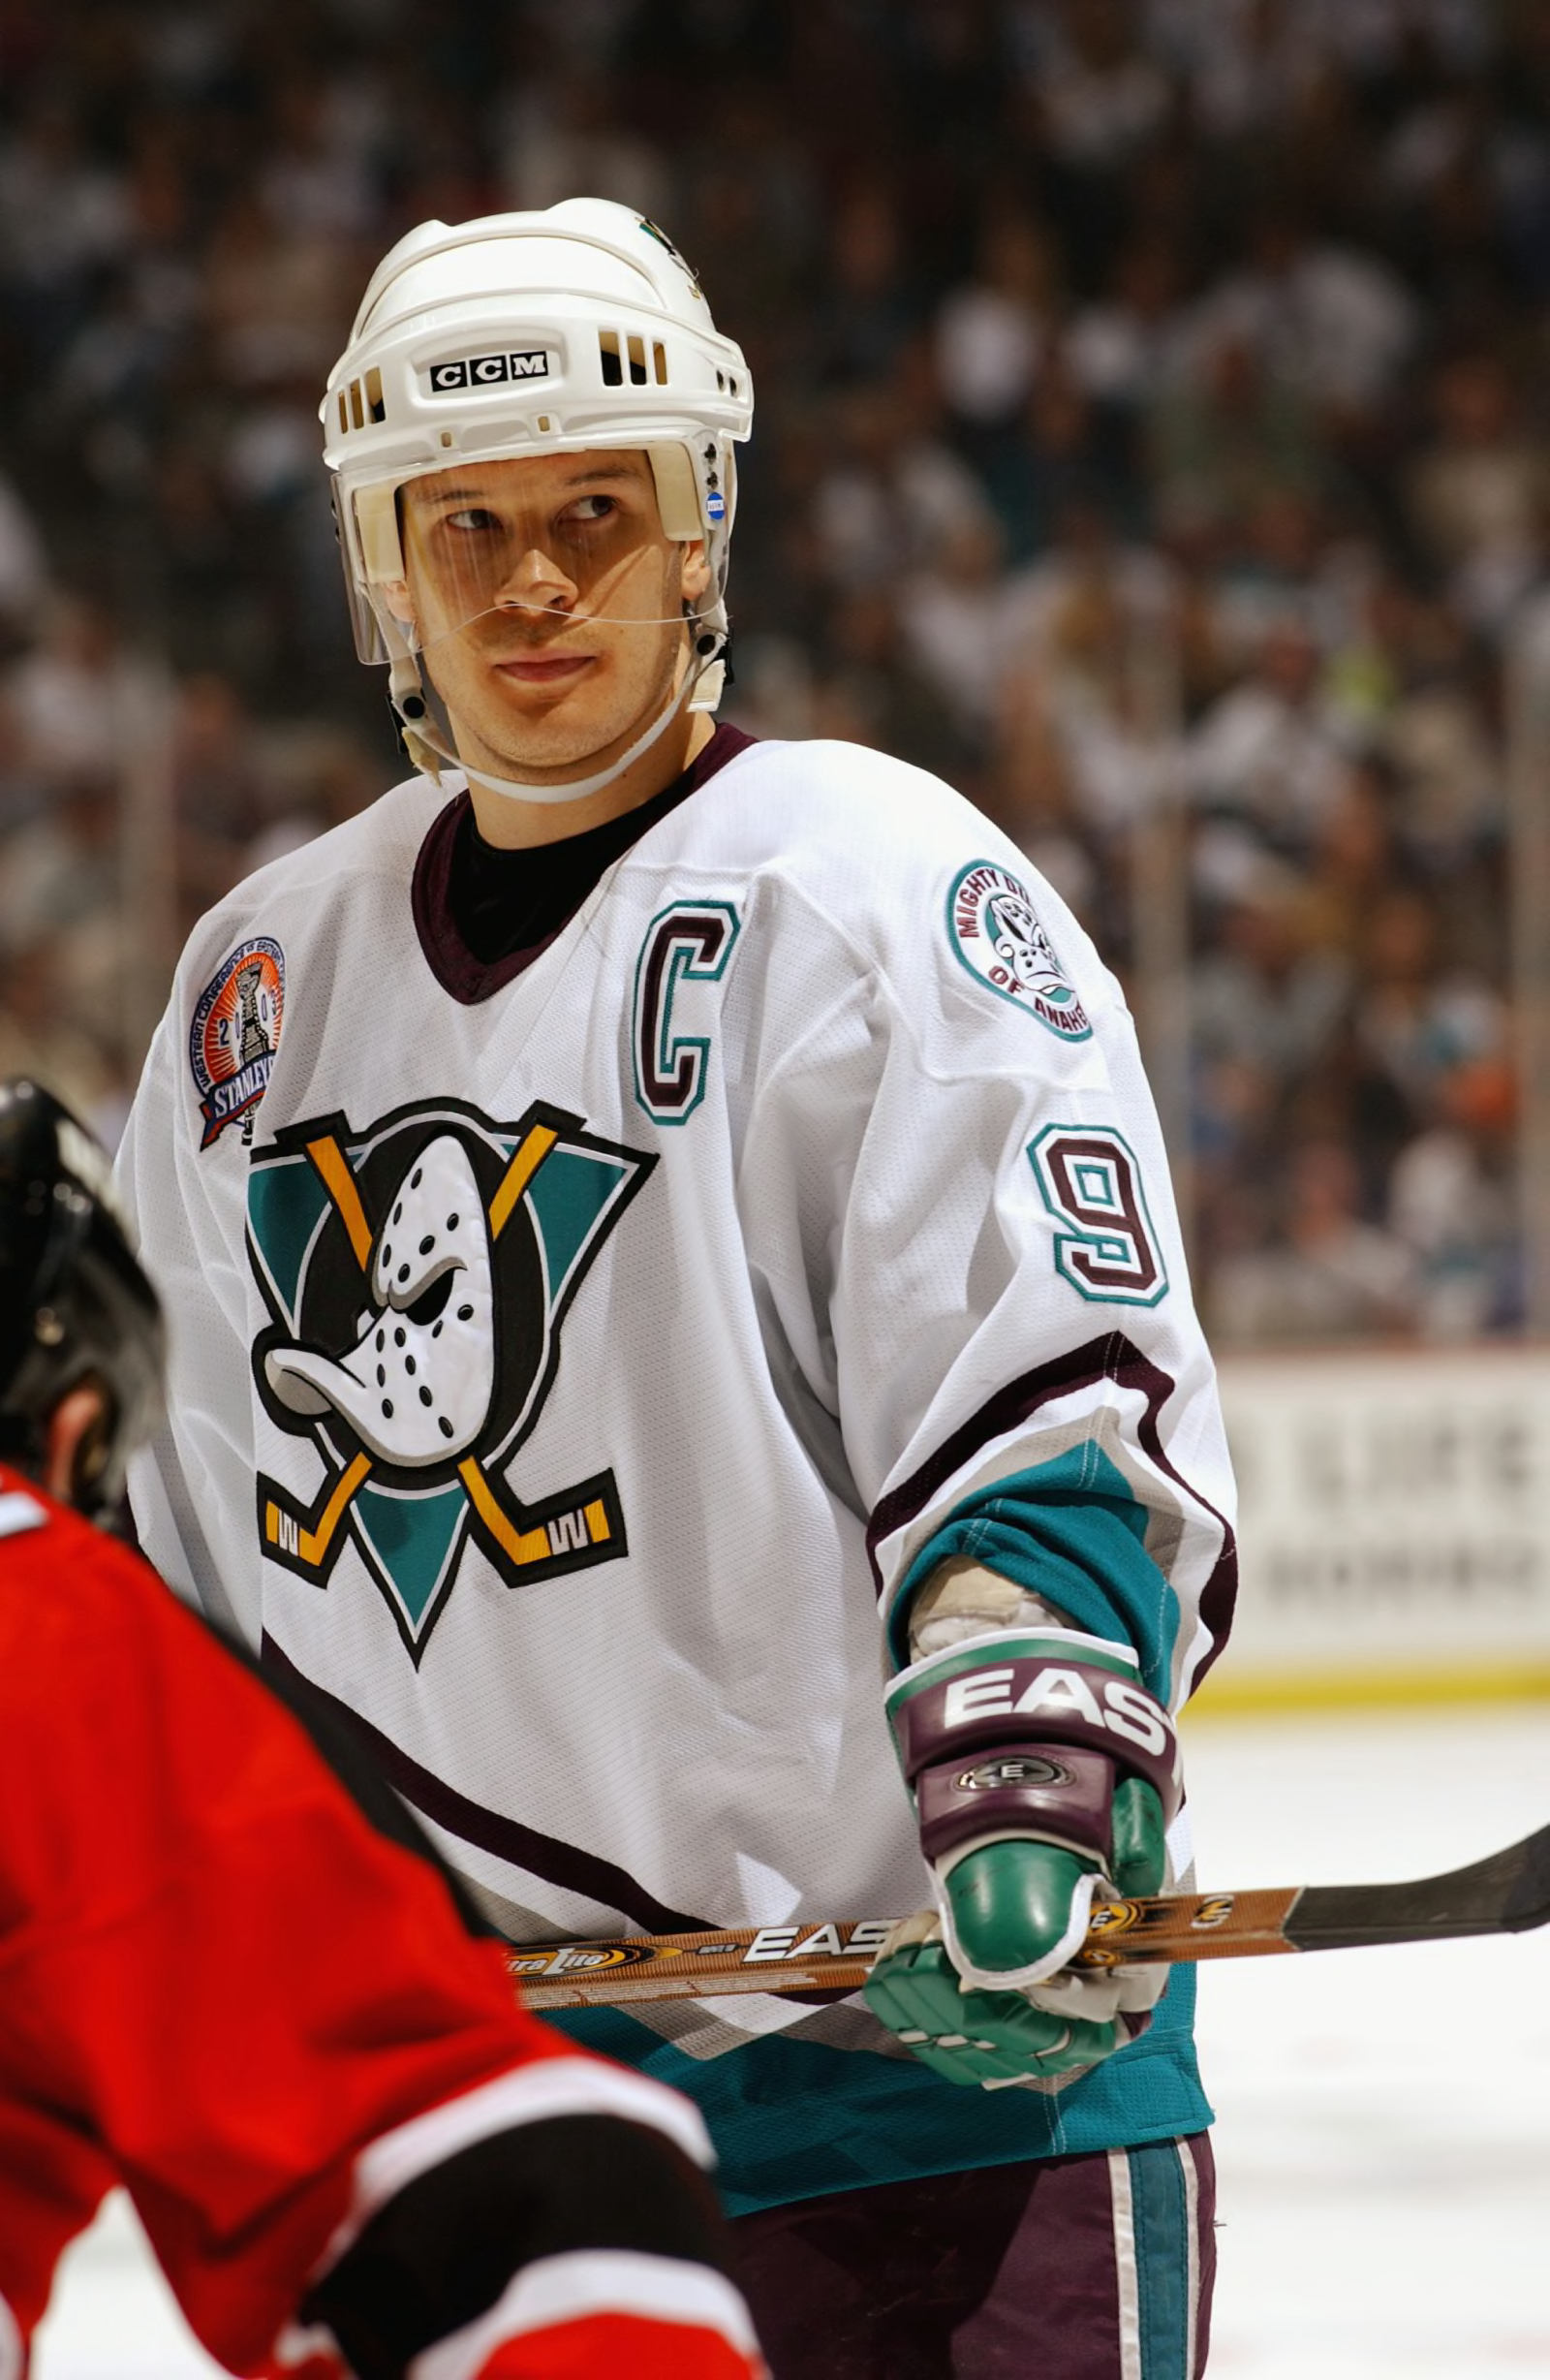 Deconstructing the Mighty Ducks' hockey league and its playoff